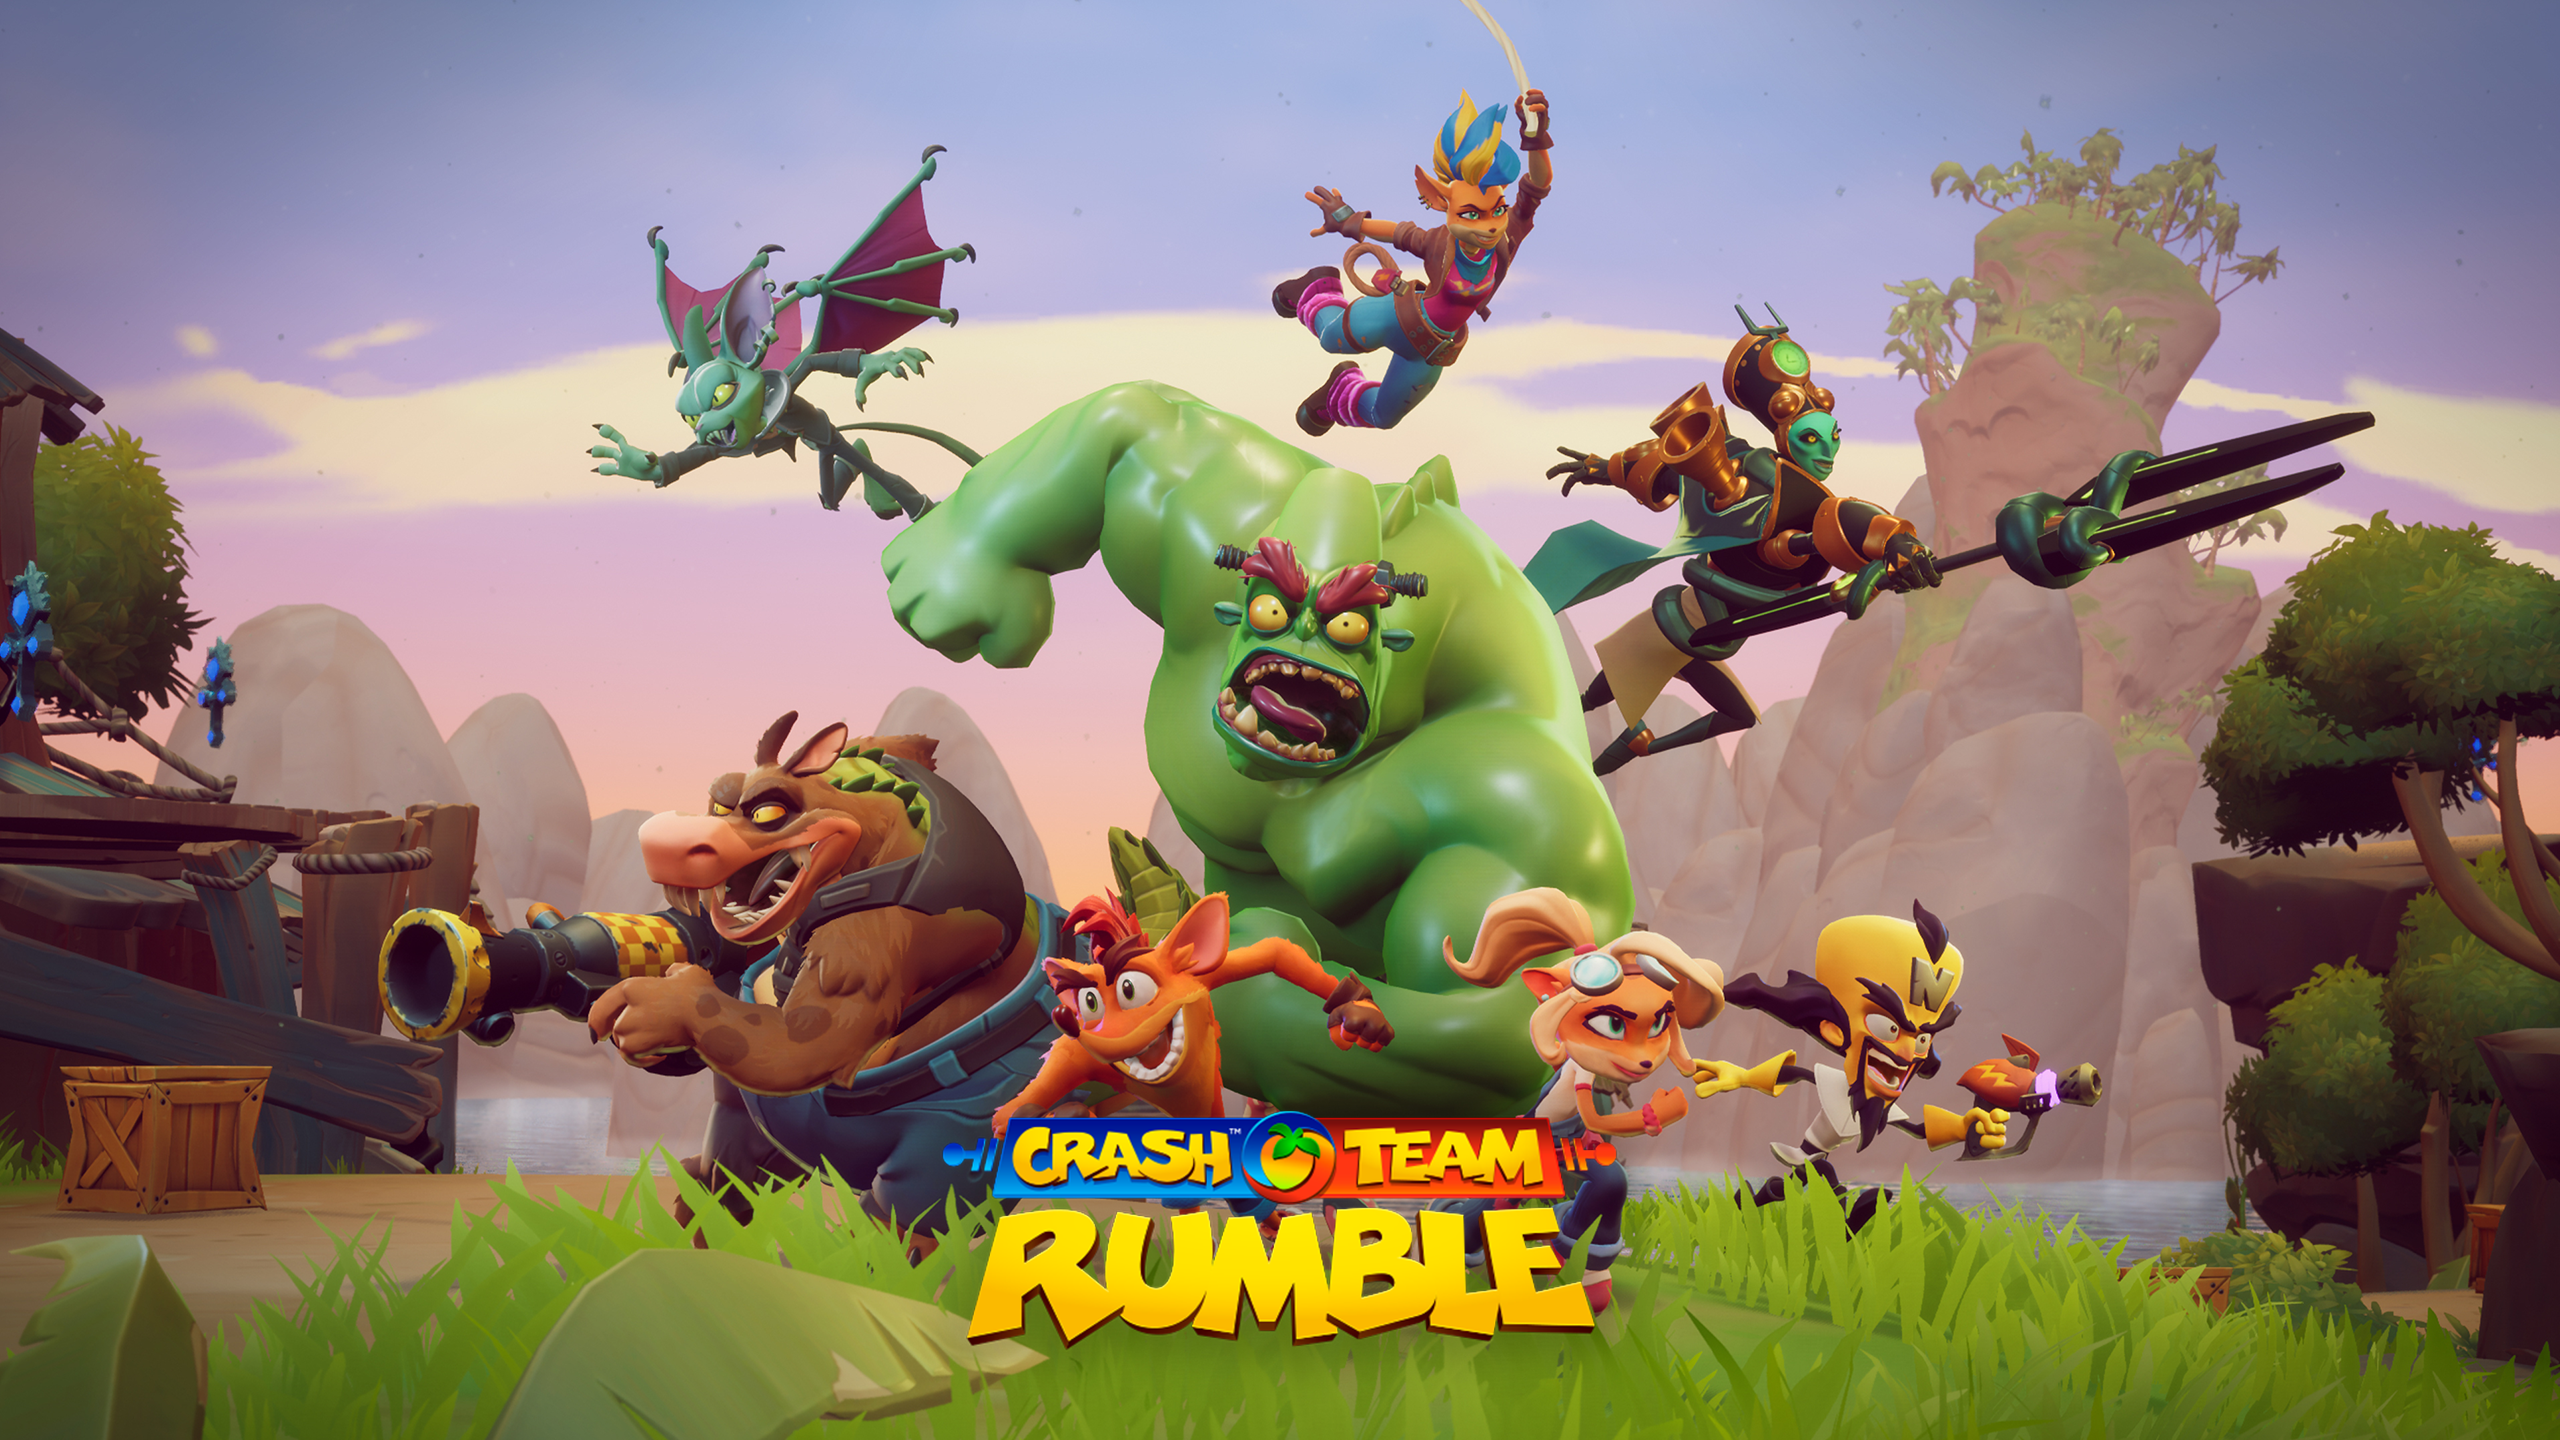 HD desktop wallpaper featuring vibrant artwork from Crash Team Rumble with animated characters in action.